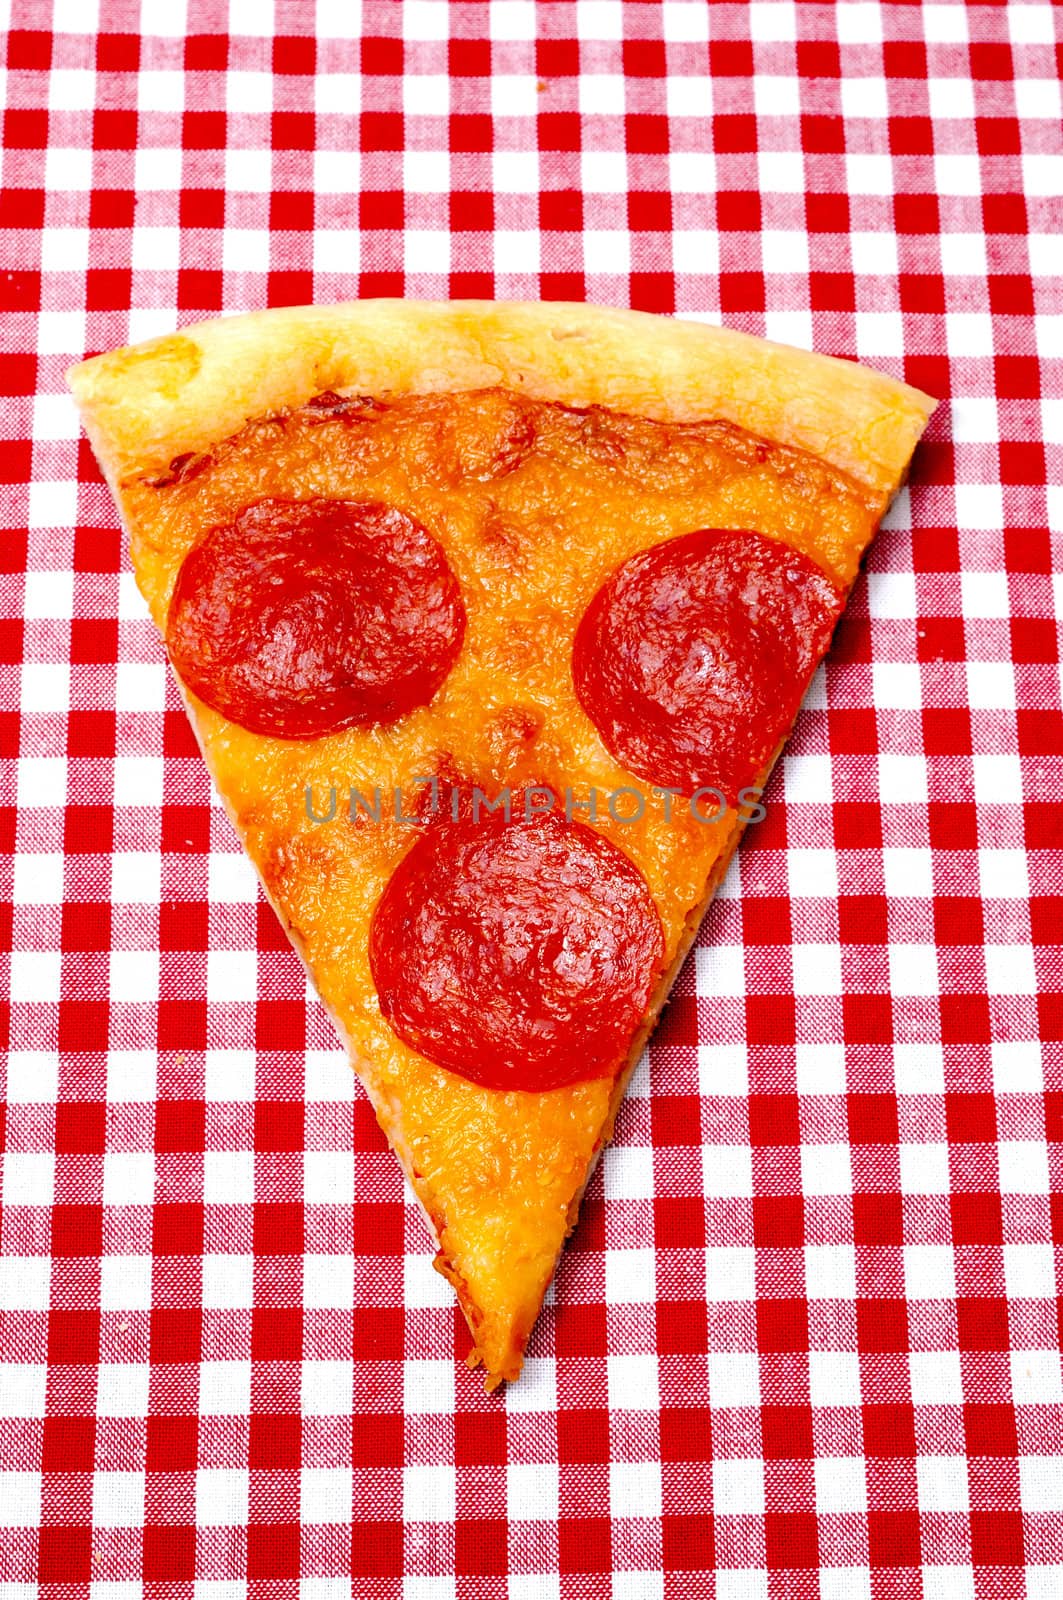 Pepperoni Pizza Slice on Red Gingham Closeup by dehooks